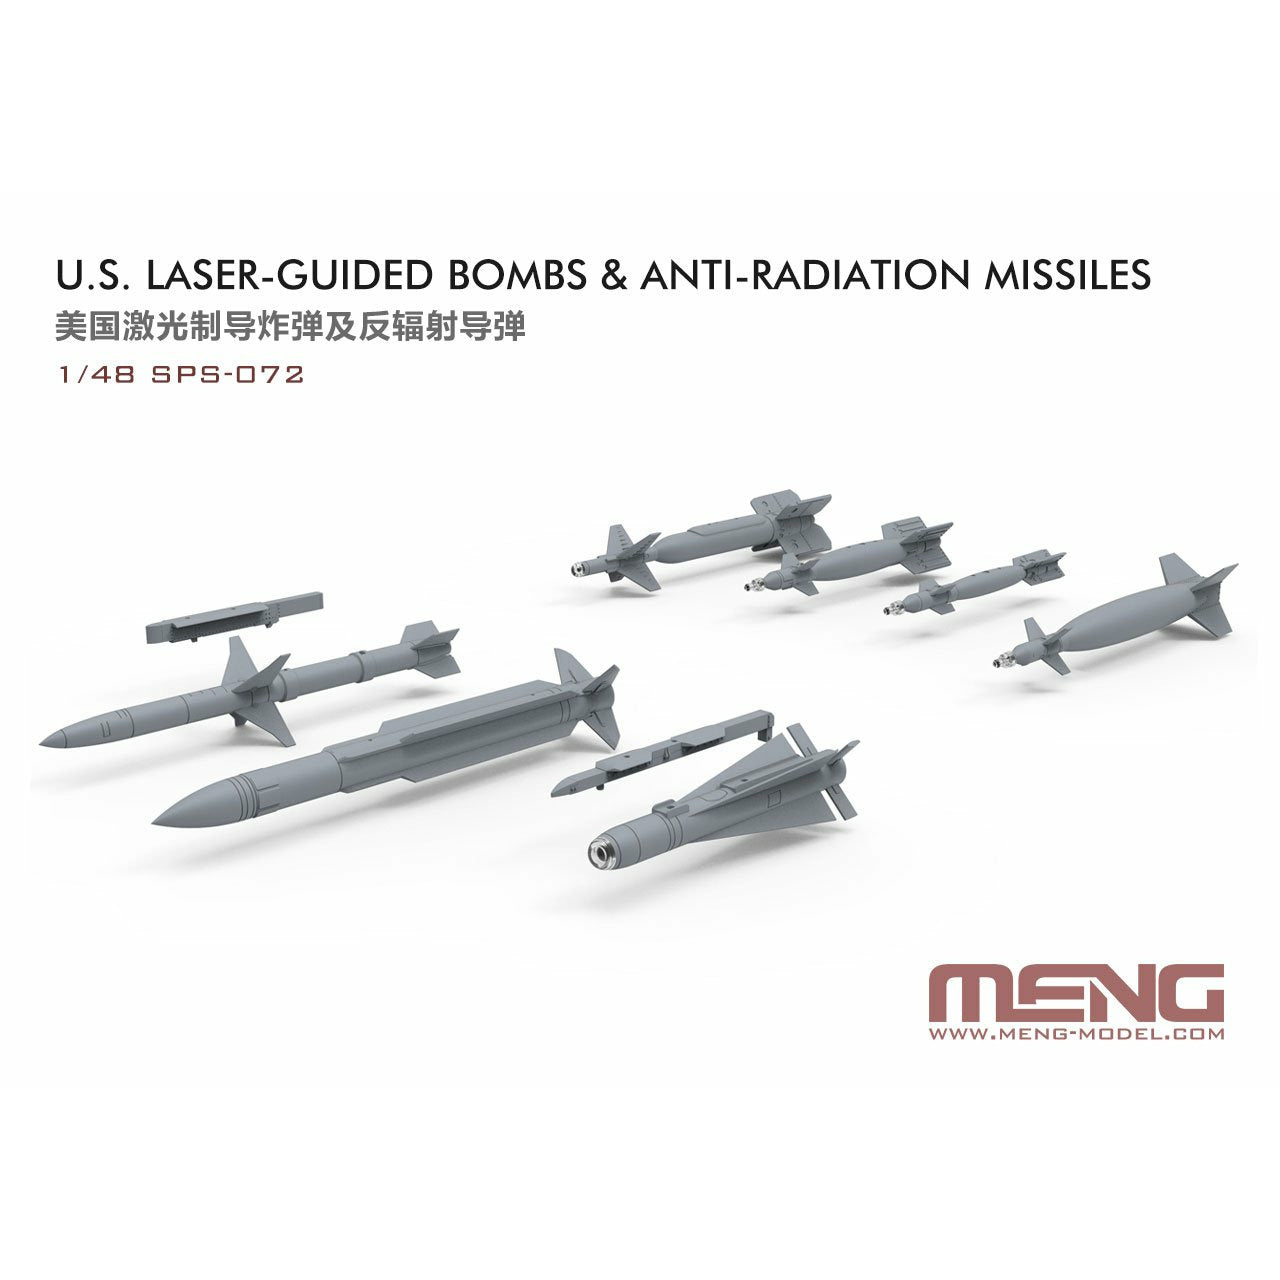 MENG 1/48 US Laser-Guided Bombs & Anti-Radiation Missiles